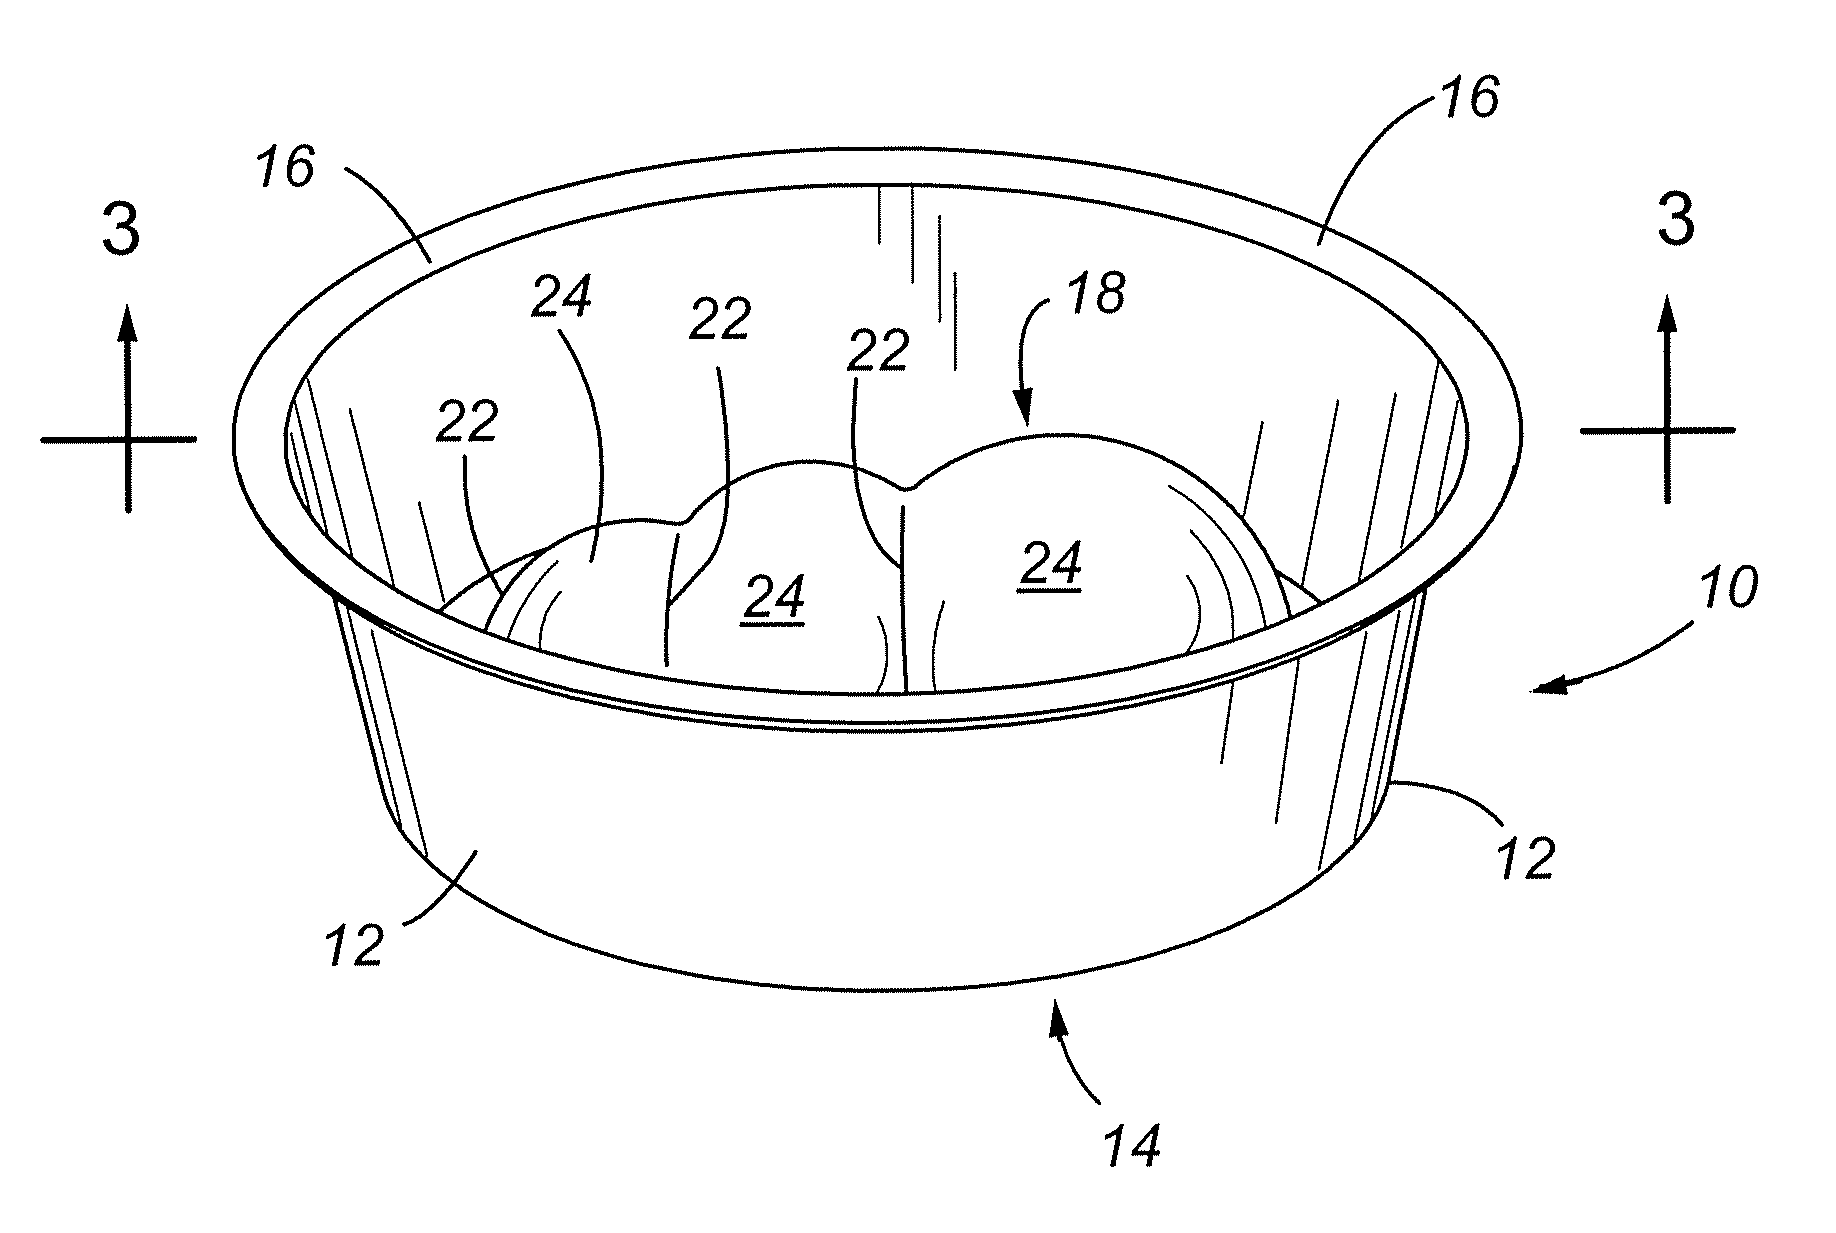 Pet food bowl with integral protrusion for preventing aspiration of food